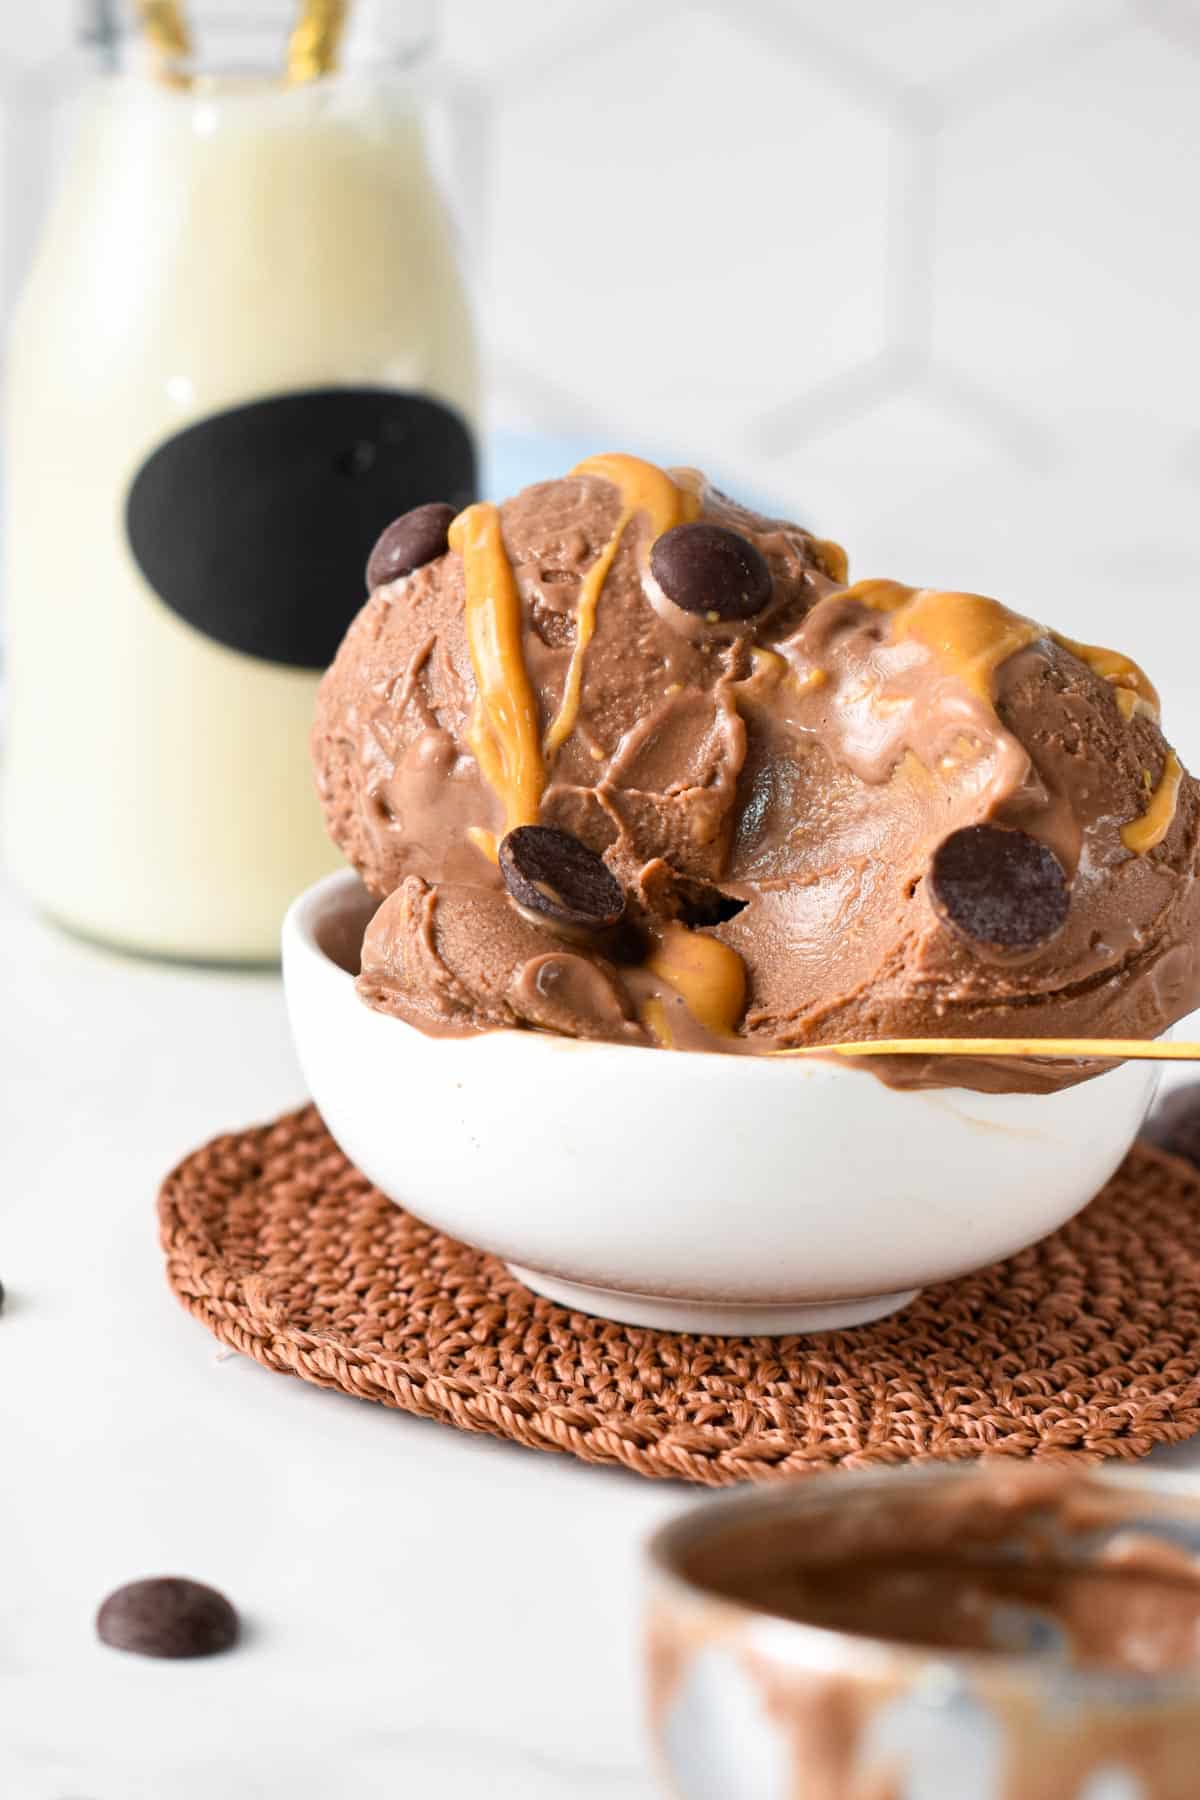 Lowest price EVER on the Ninja Creami + new fave protein ice cream